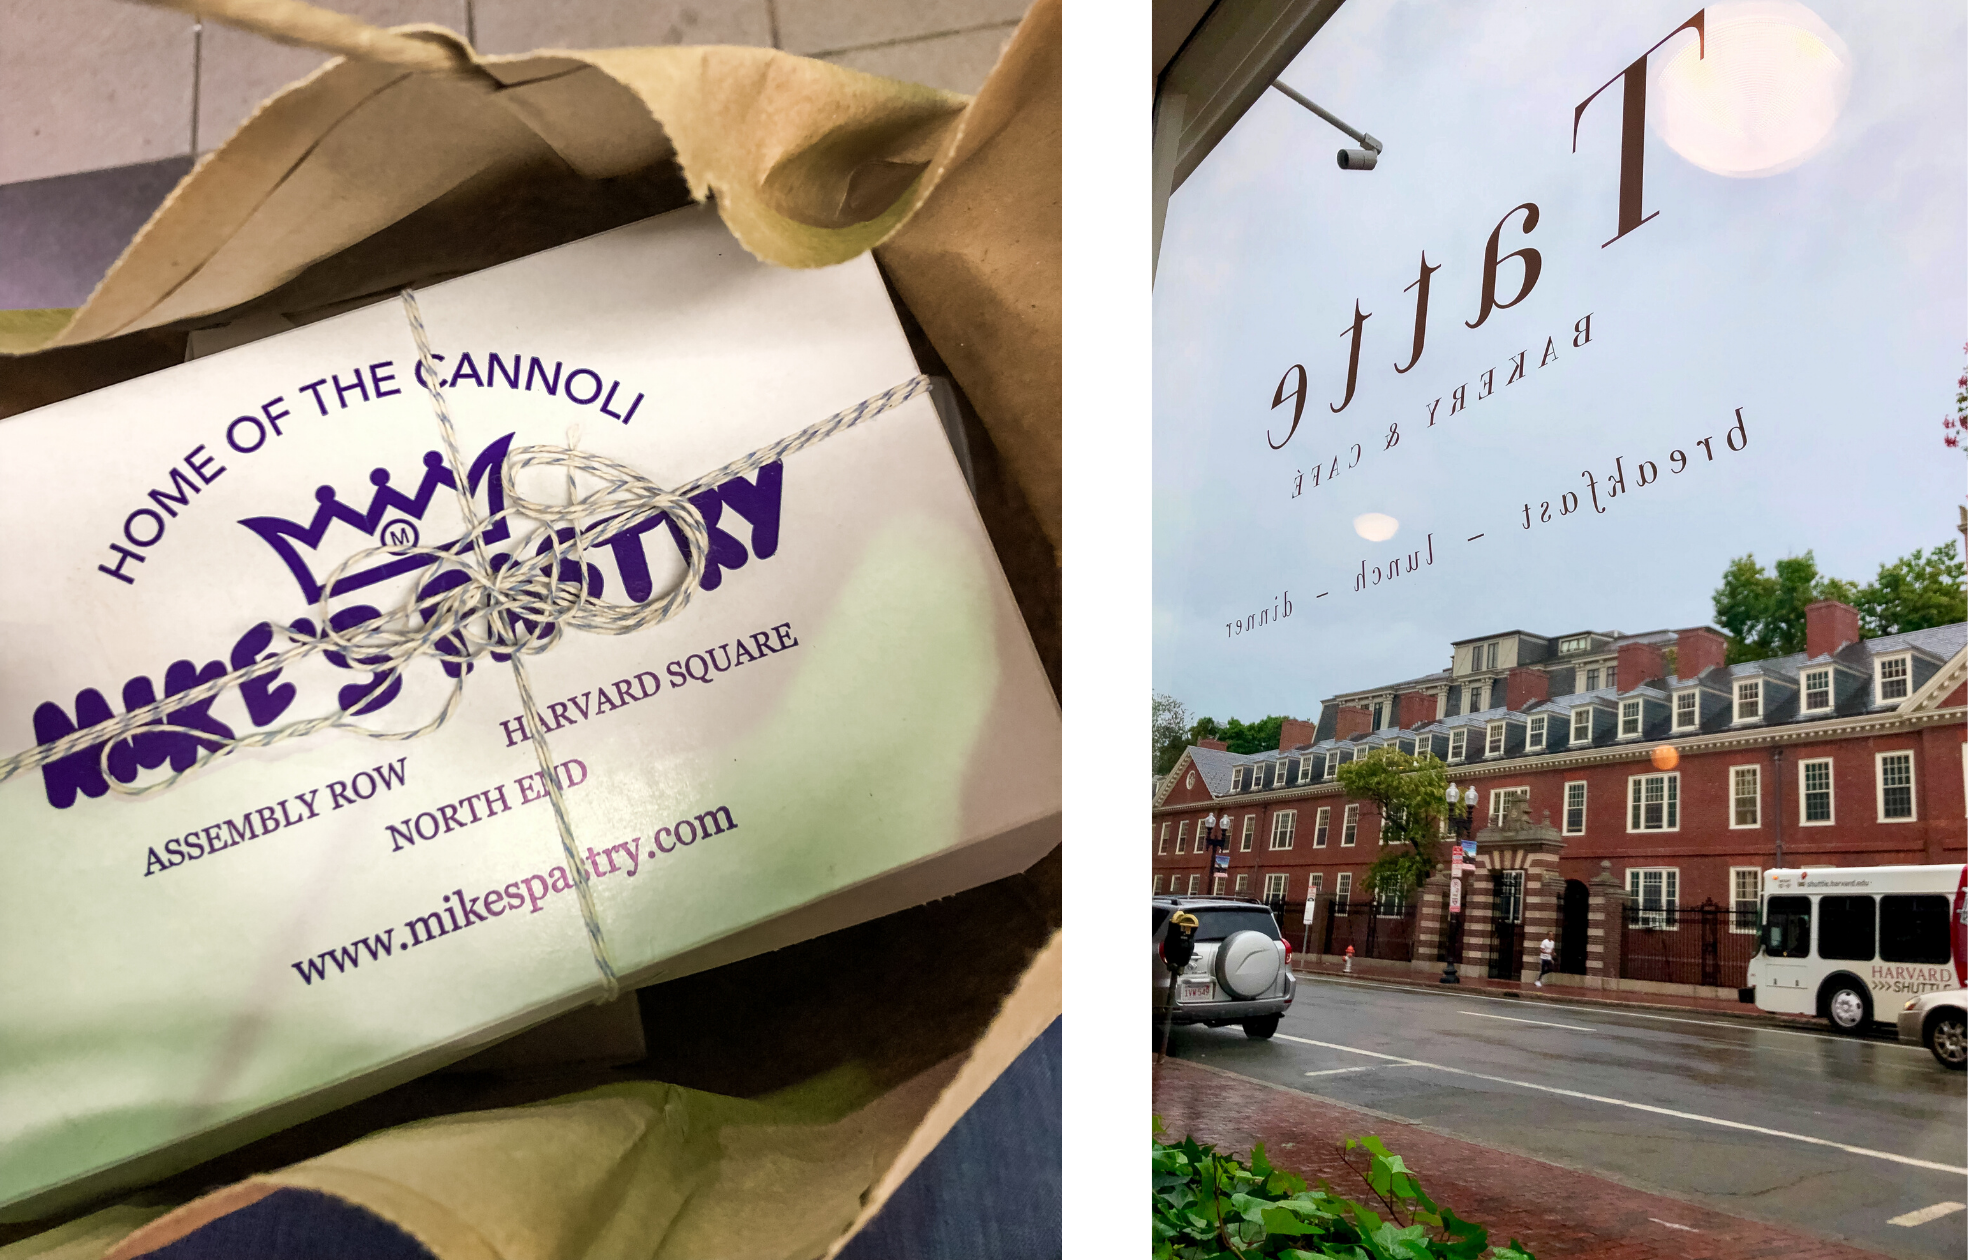 Home of the Cannoli – North End, Harvard Square, Assembly Row – Boston, MA